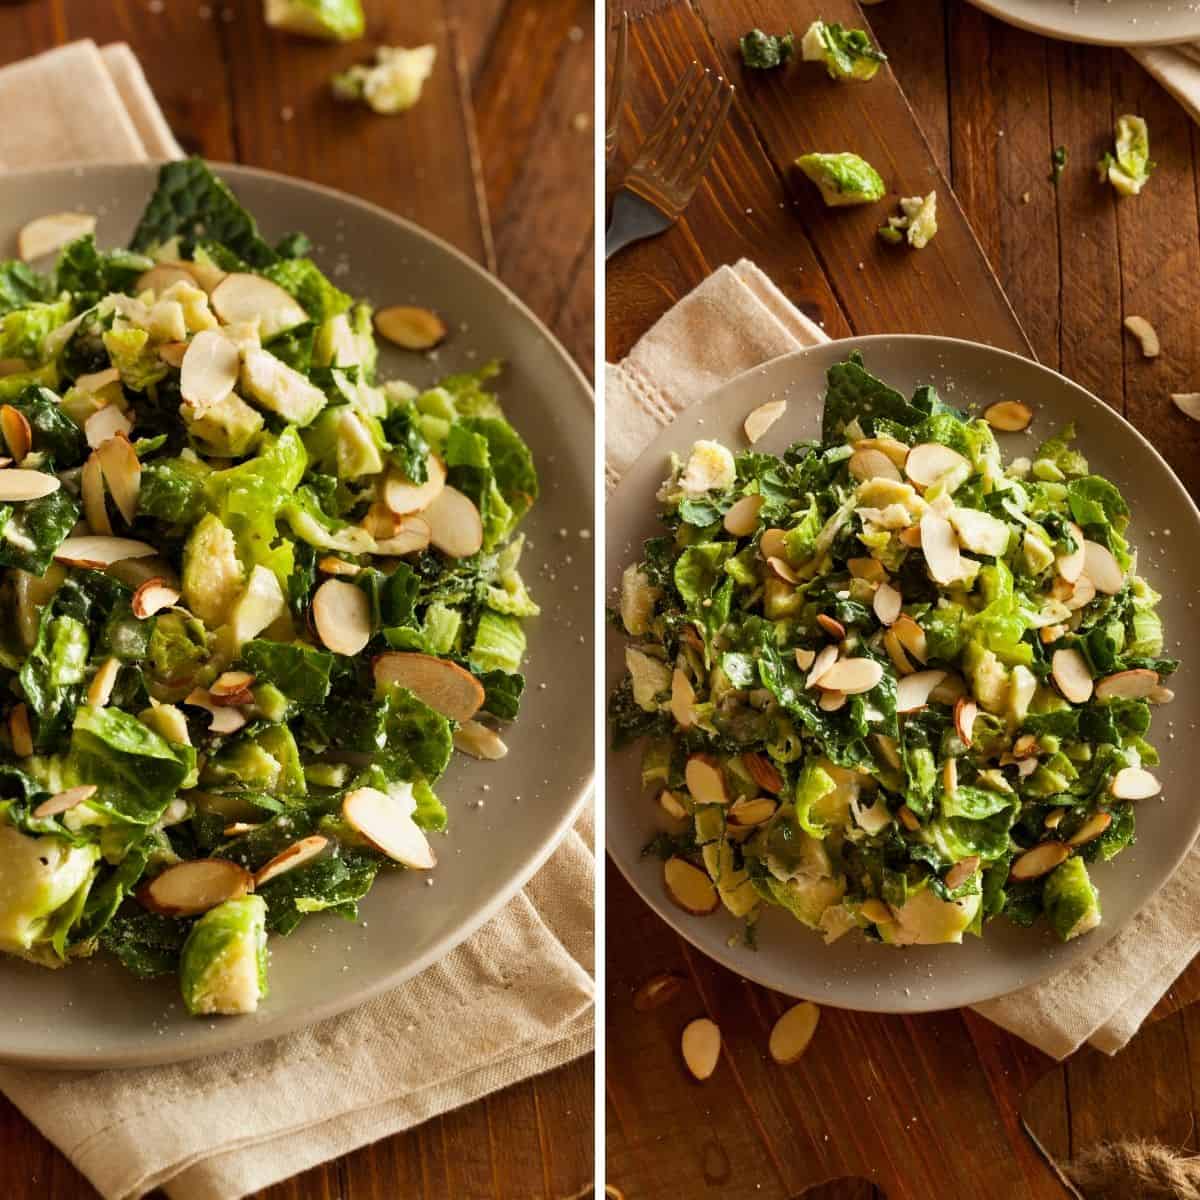 kale and brussels sprouts salad serve in a plates with almonds as garnishing for veg side dish 